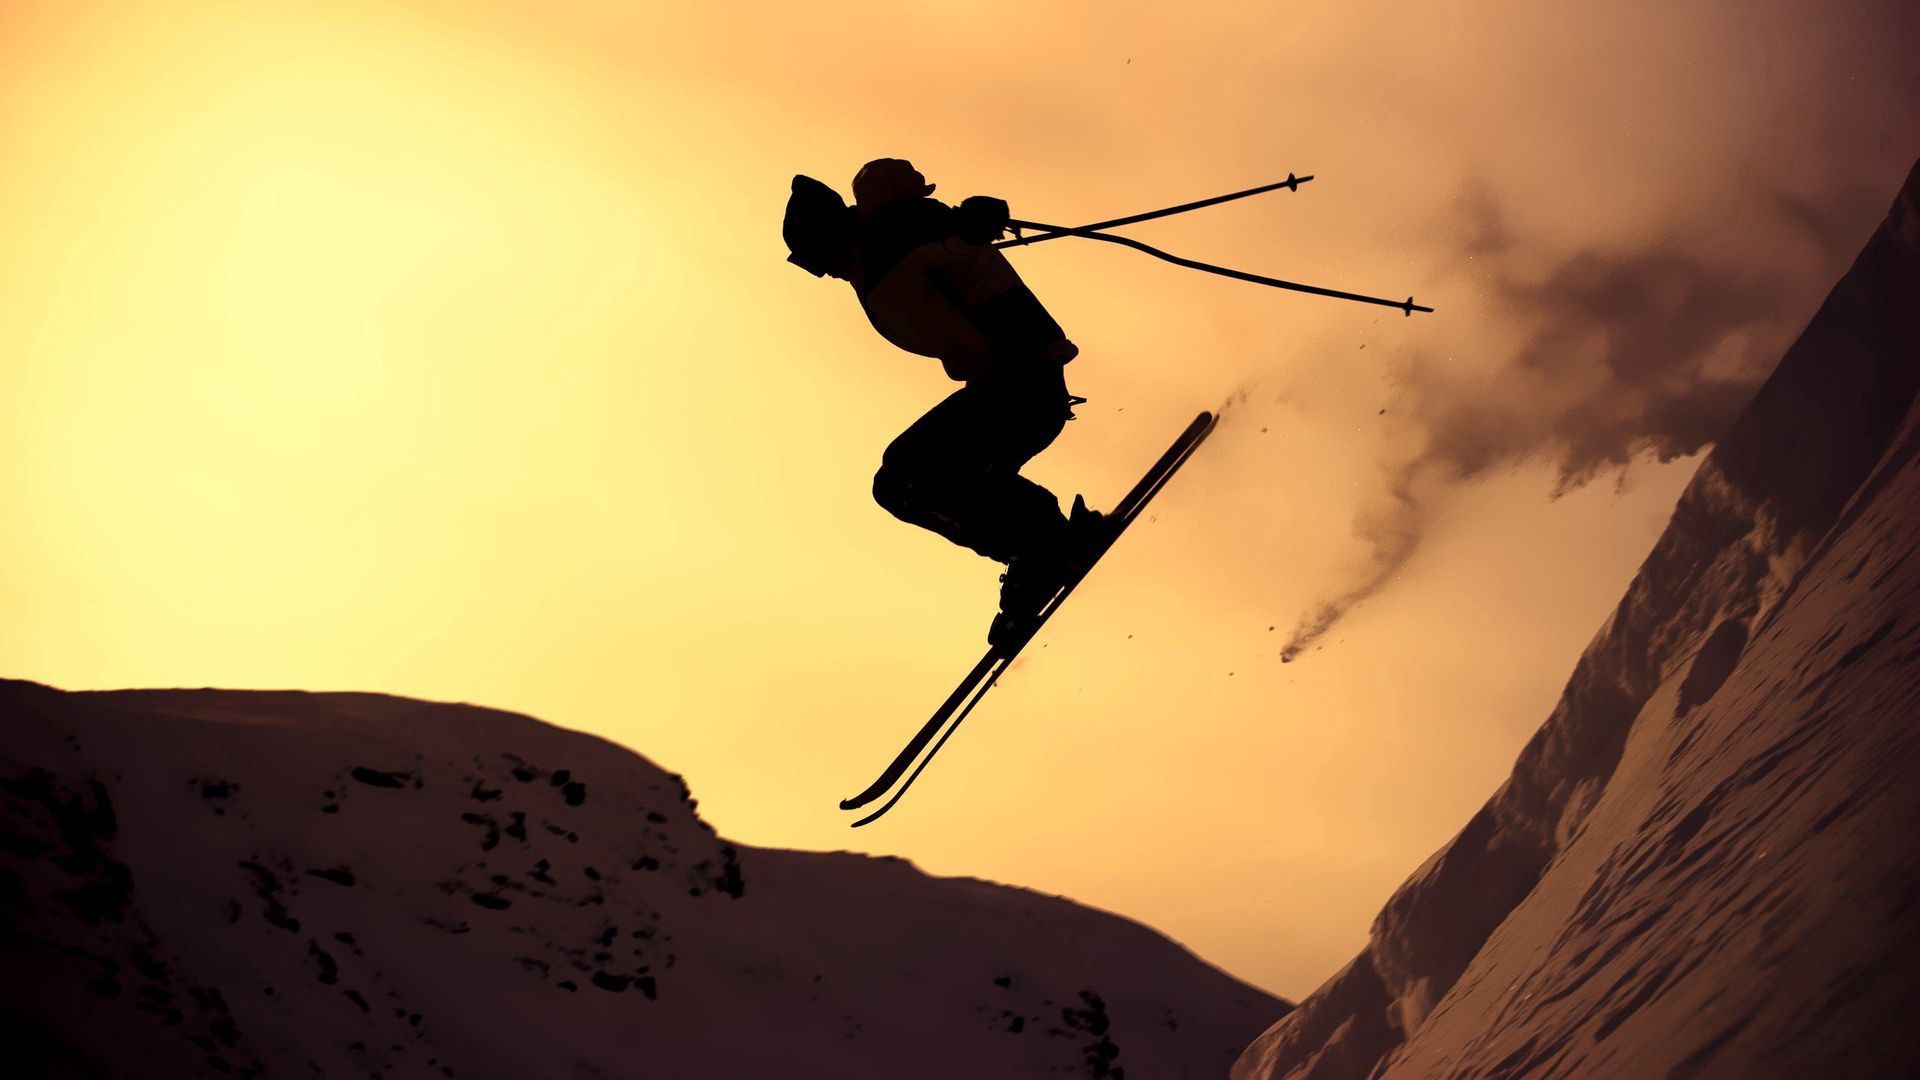 skiing, extreme, sports, snow, silhouette, bounce, jump, alpine skiing